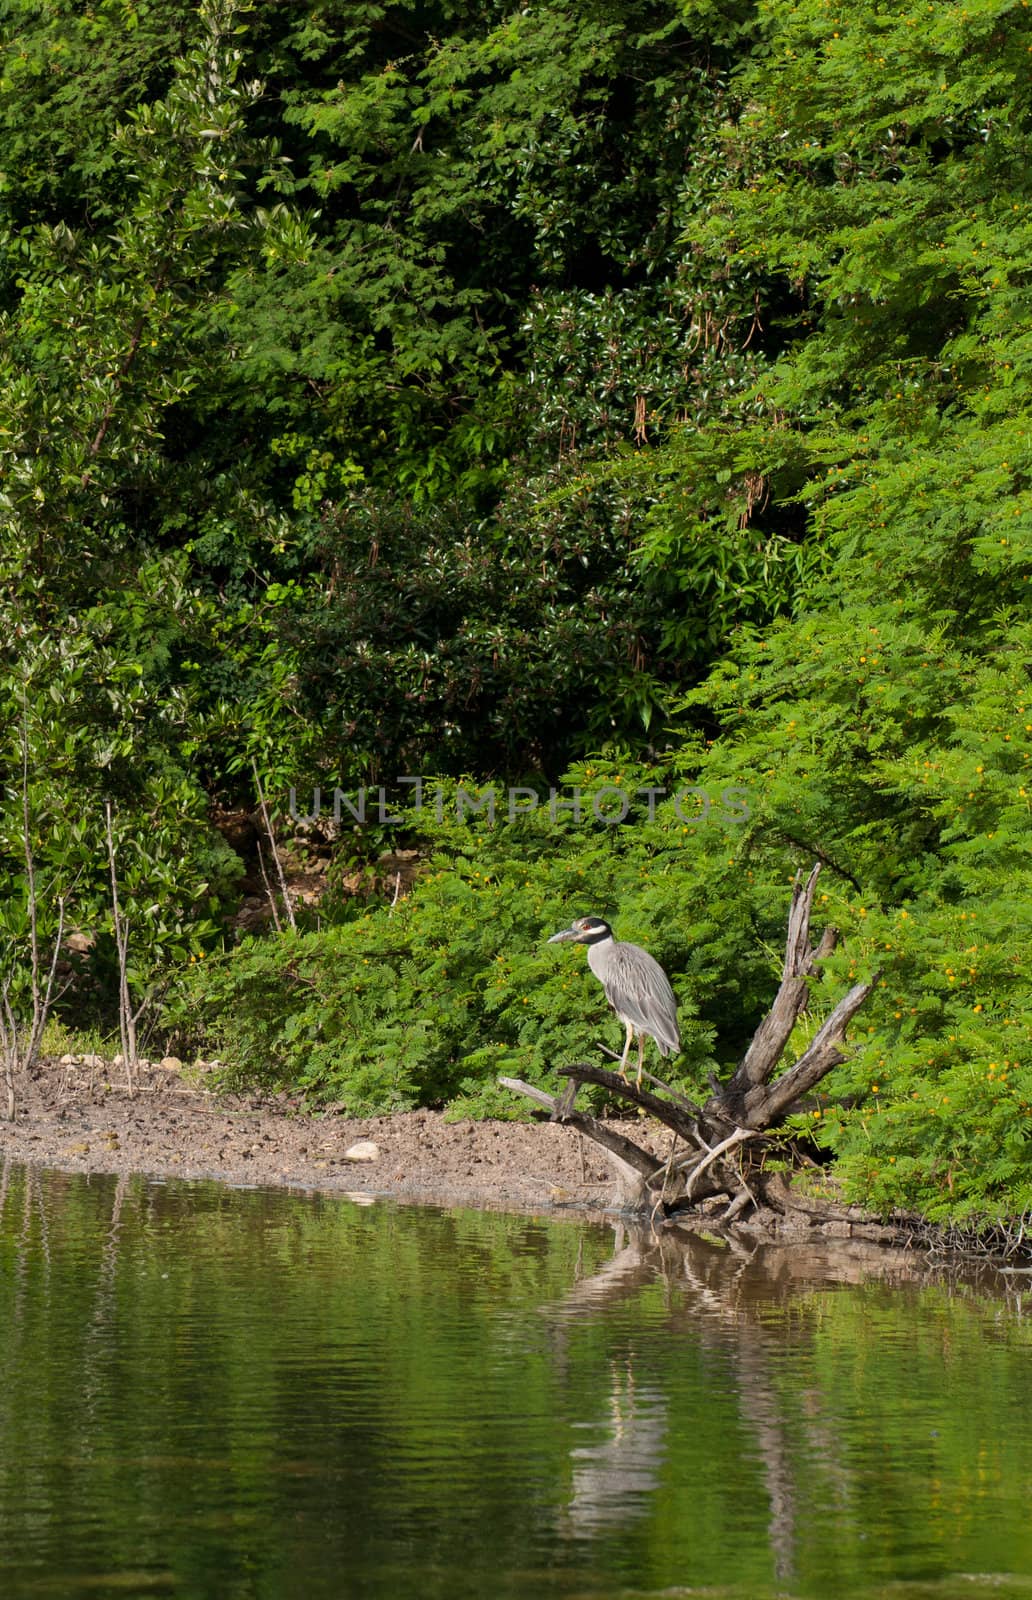 Yellow-crowned Night Heron by luissantos84